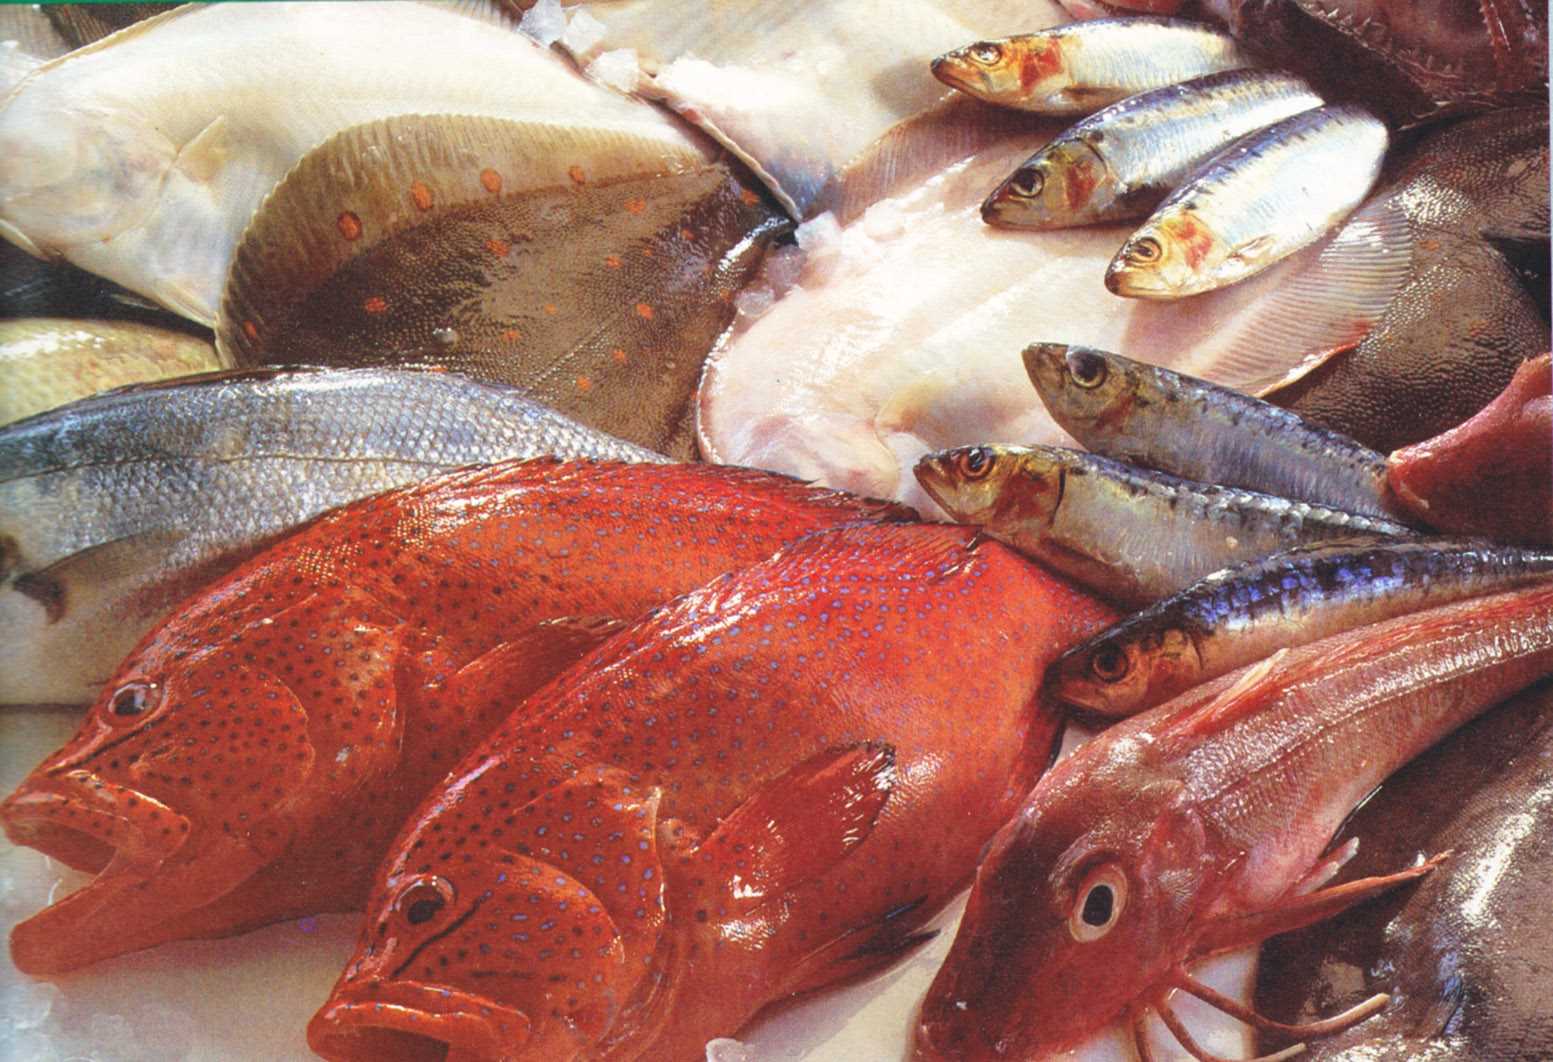 Buy Your Seafood Safely!